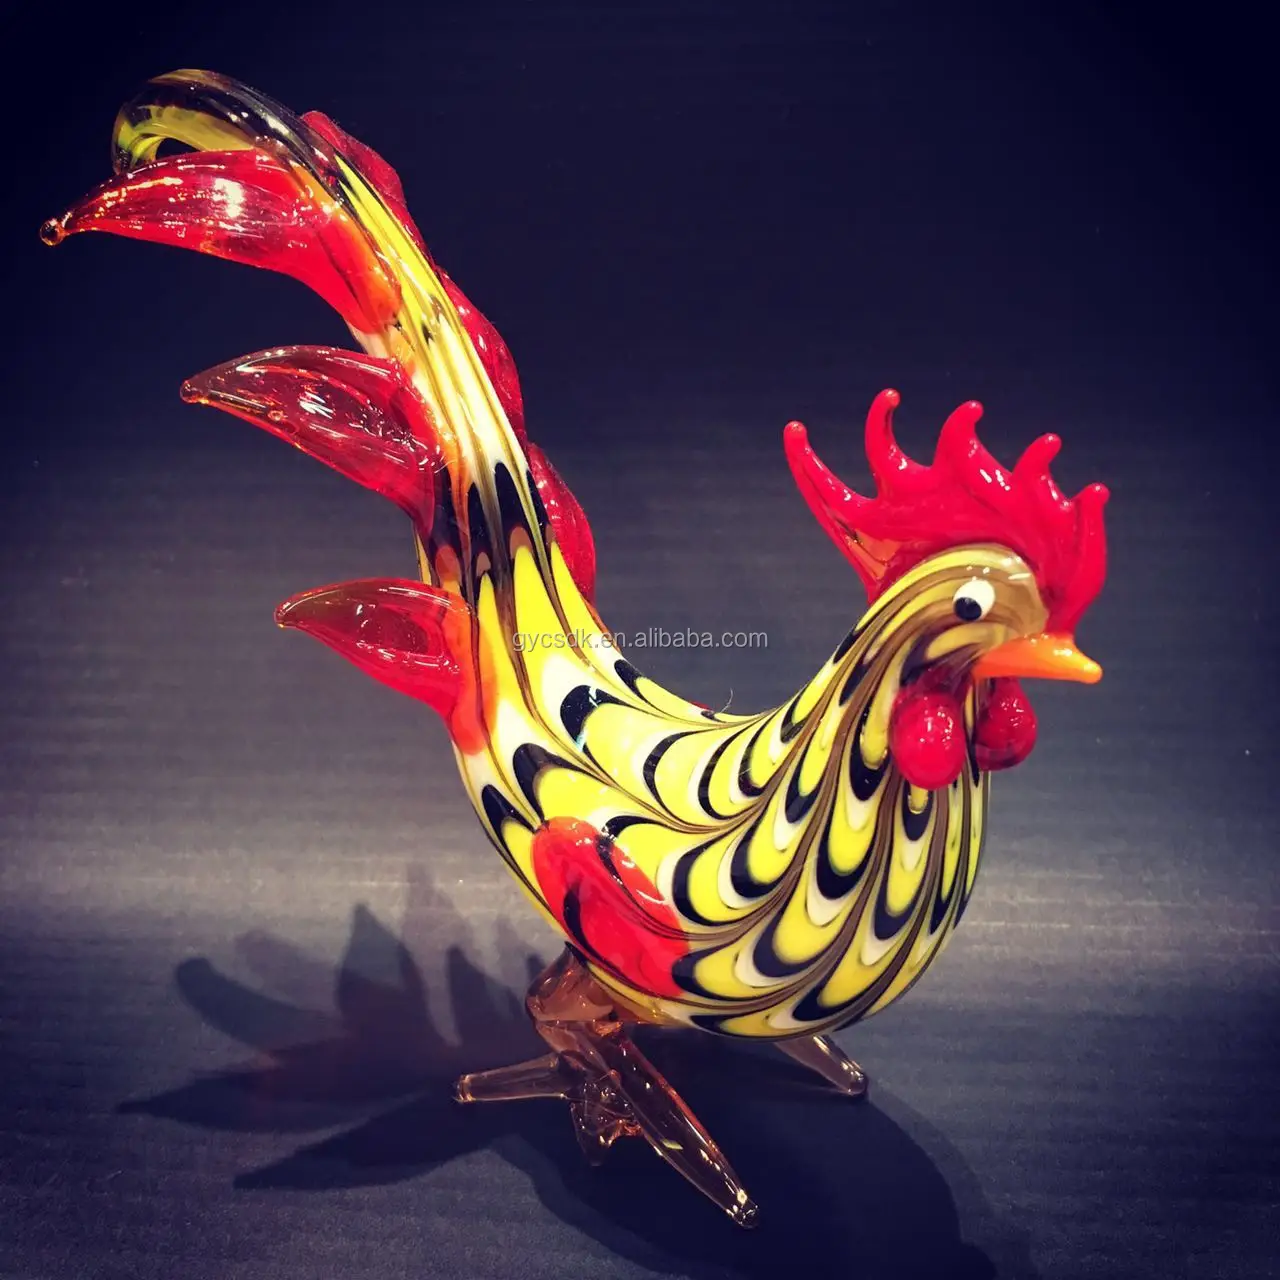 Funny creative gifts animal figurines rooster murano glass. 